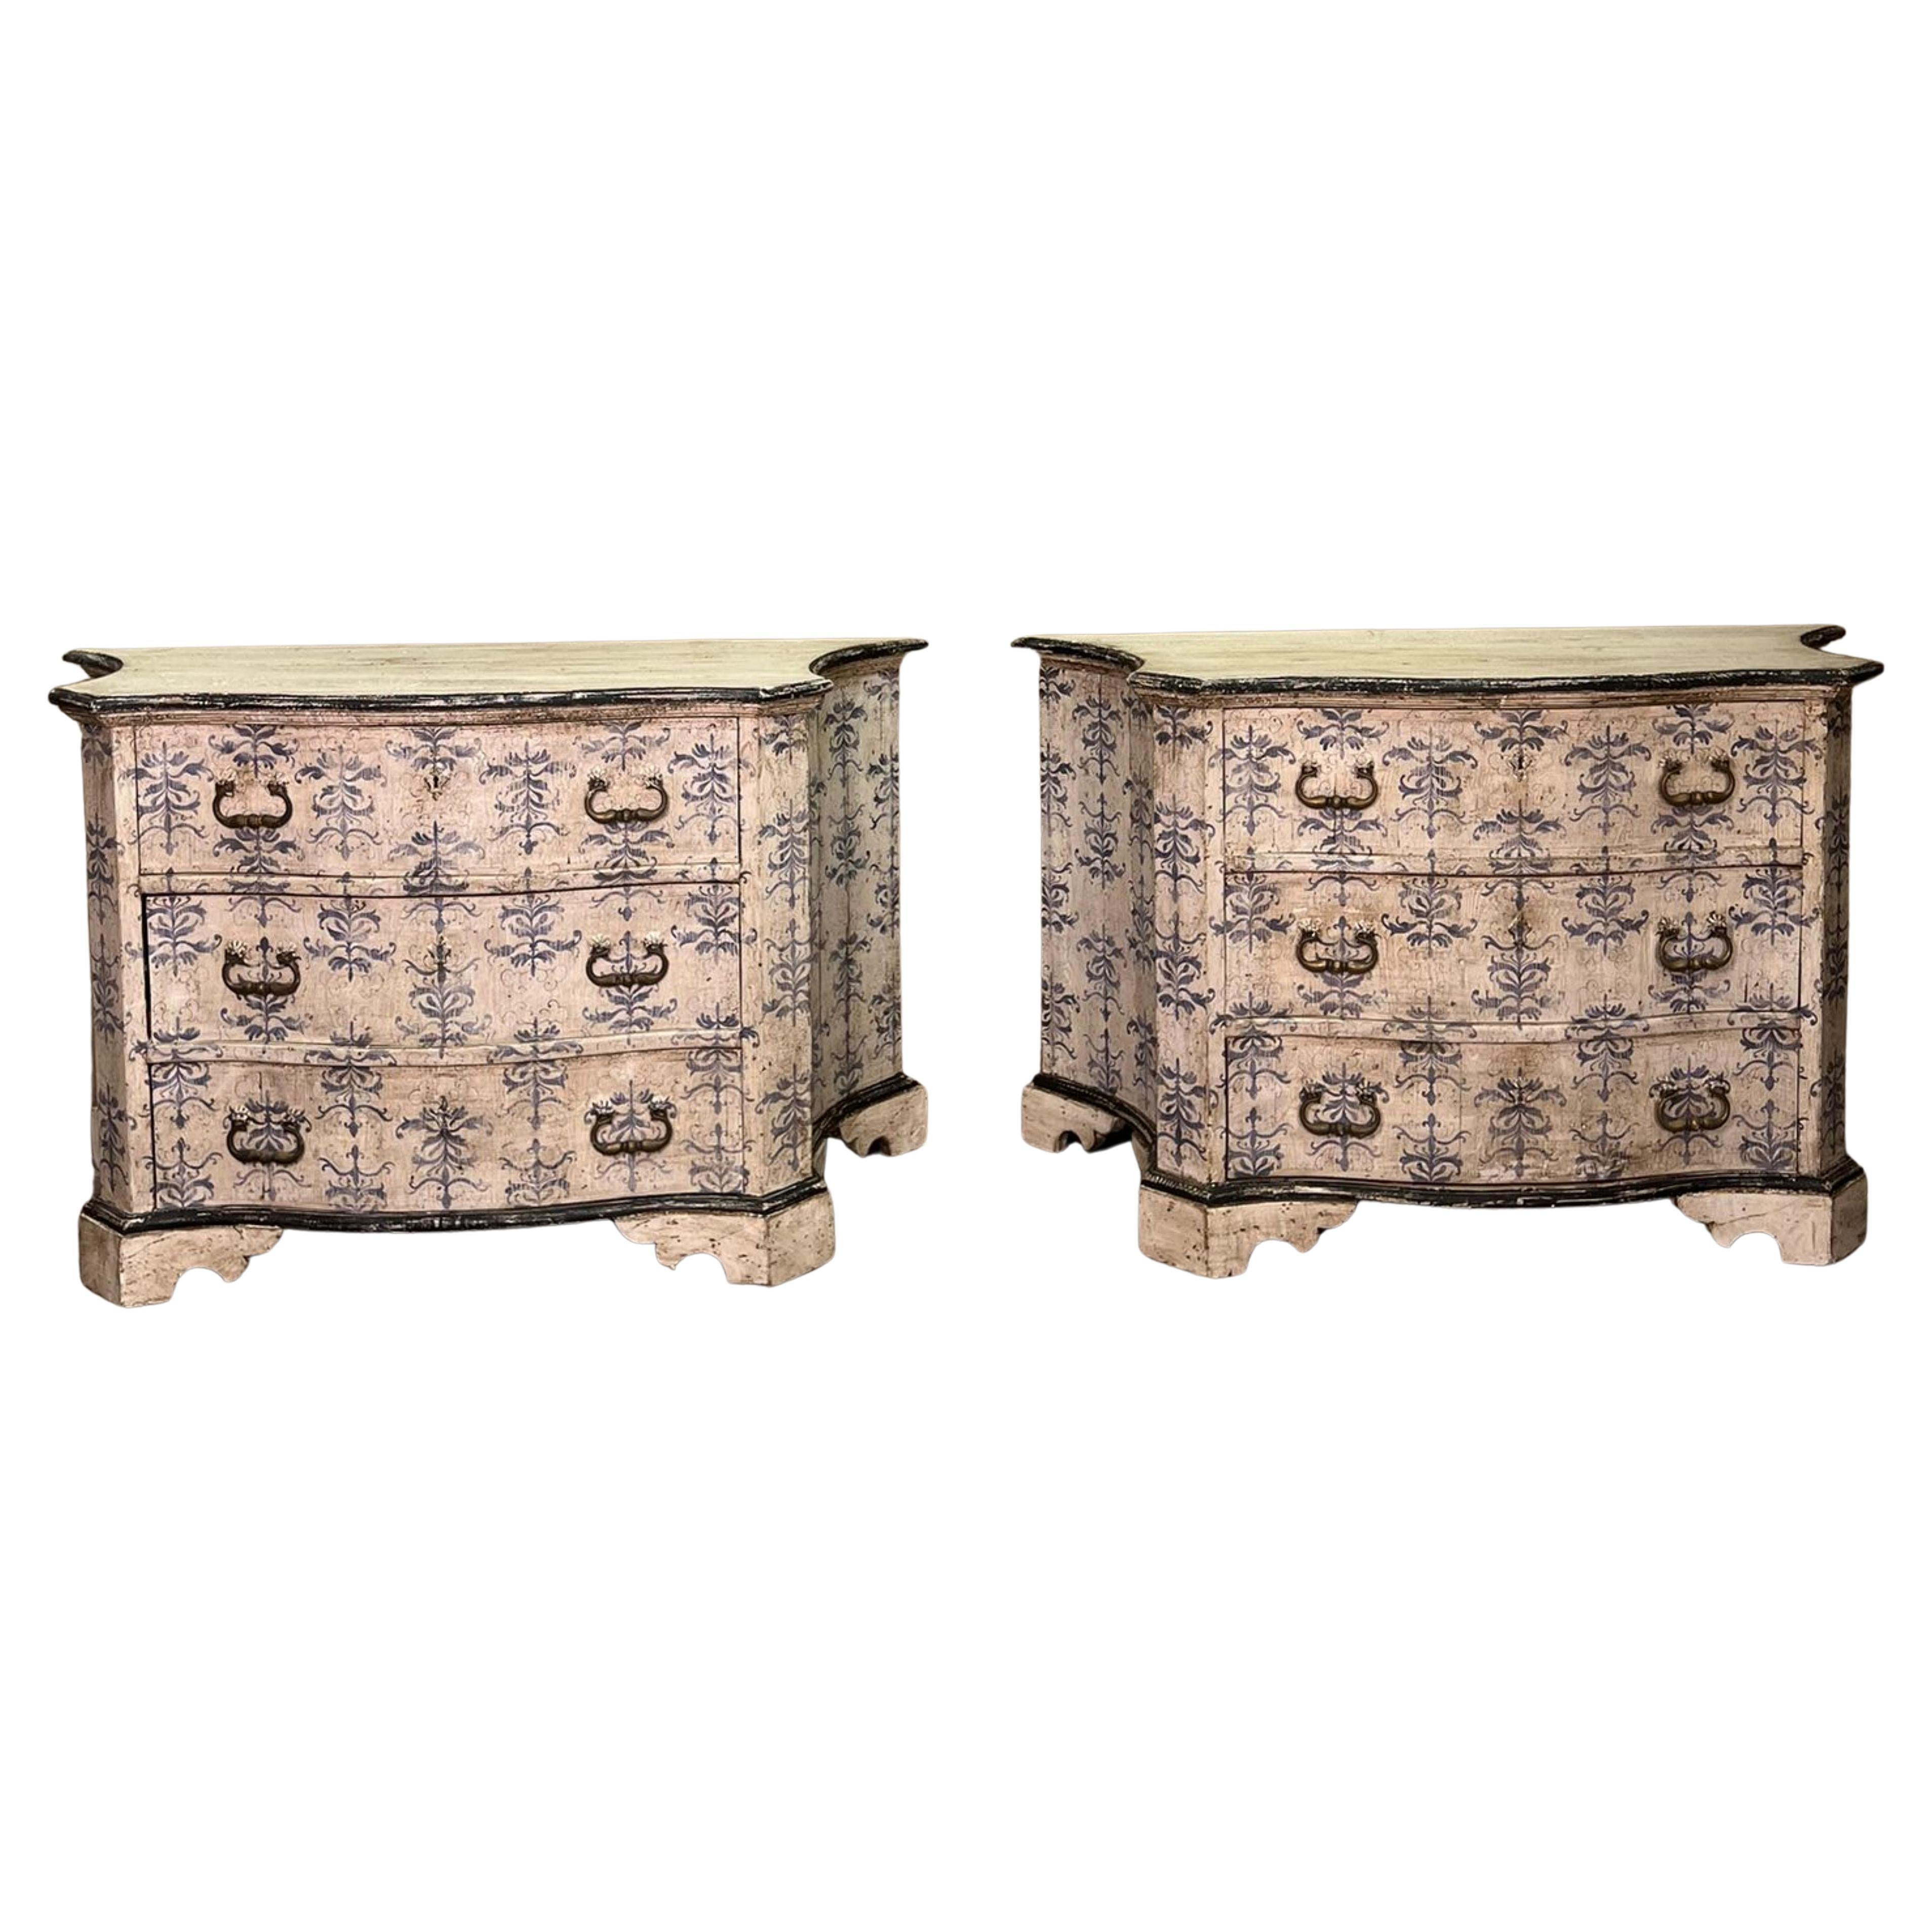 Beautiful Pair of Italian Chests of Drawers early 20th Century
Pine wood
perfectly preserved
Measurements with the upper floor:
109cm x 47cm x 2.5cm
Measurements without the upstairs:
105cm x 47cm x 90cm